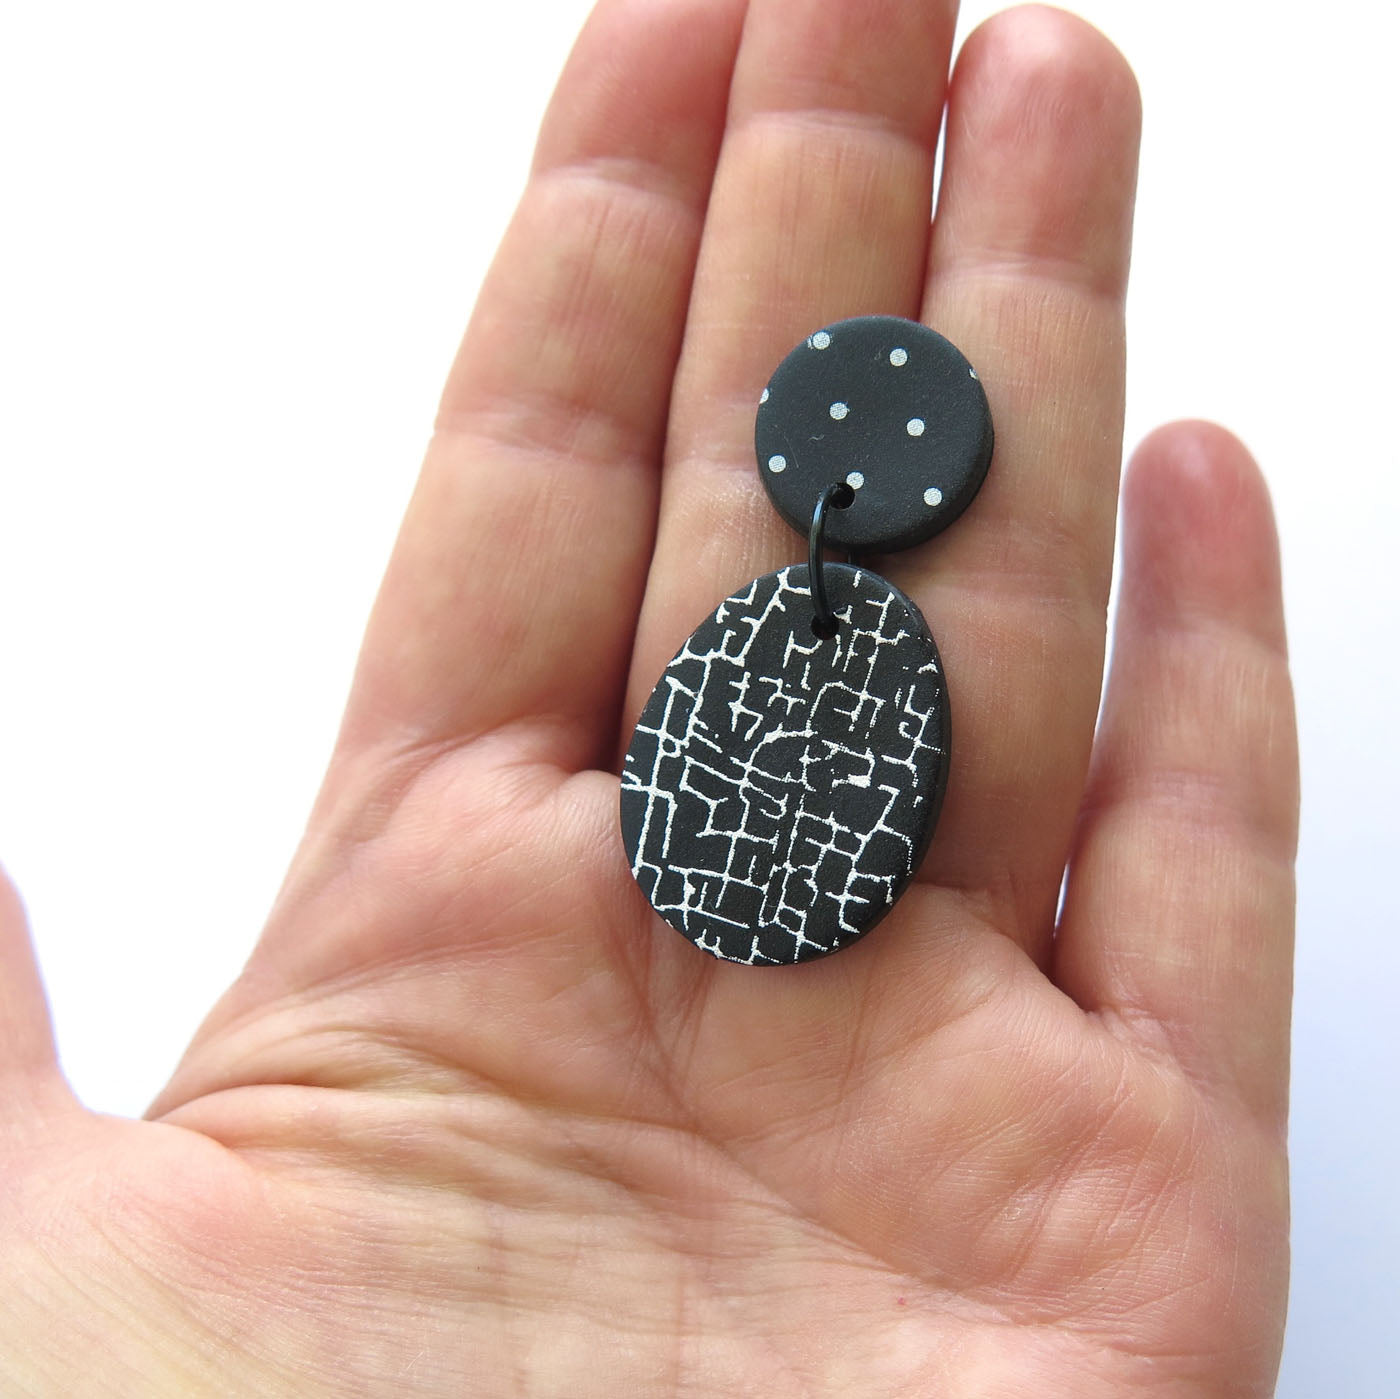 Crackle Black and White Statement Earrings - Egg drop -Polymer Clay